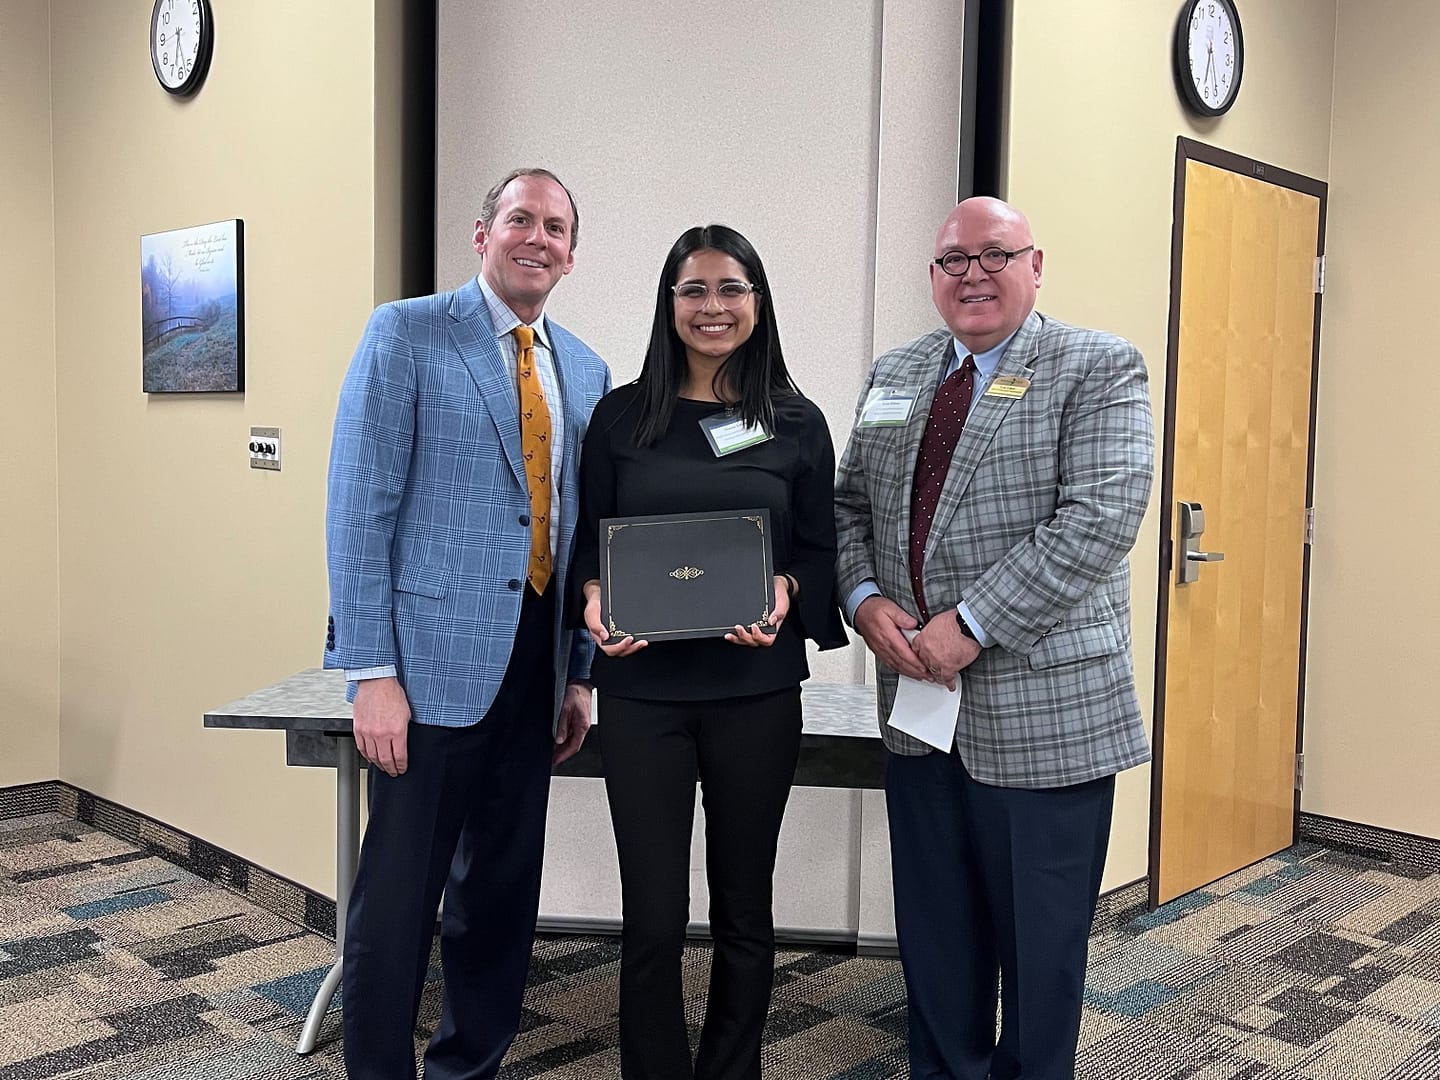 Left to right: Franklin Farrow, Morning Pointe Senior Living co-founder and CEO; Noemi Lozano, scholarship recipient; and Scott Edens, vice president of professional development at Morning Pointe Senior Living